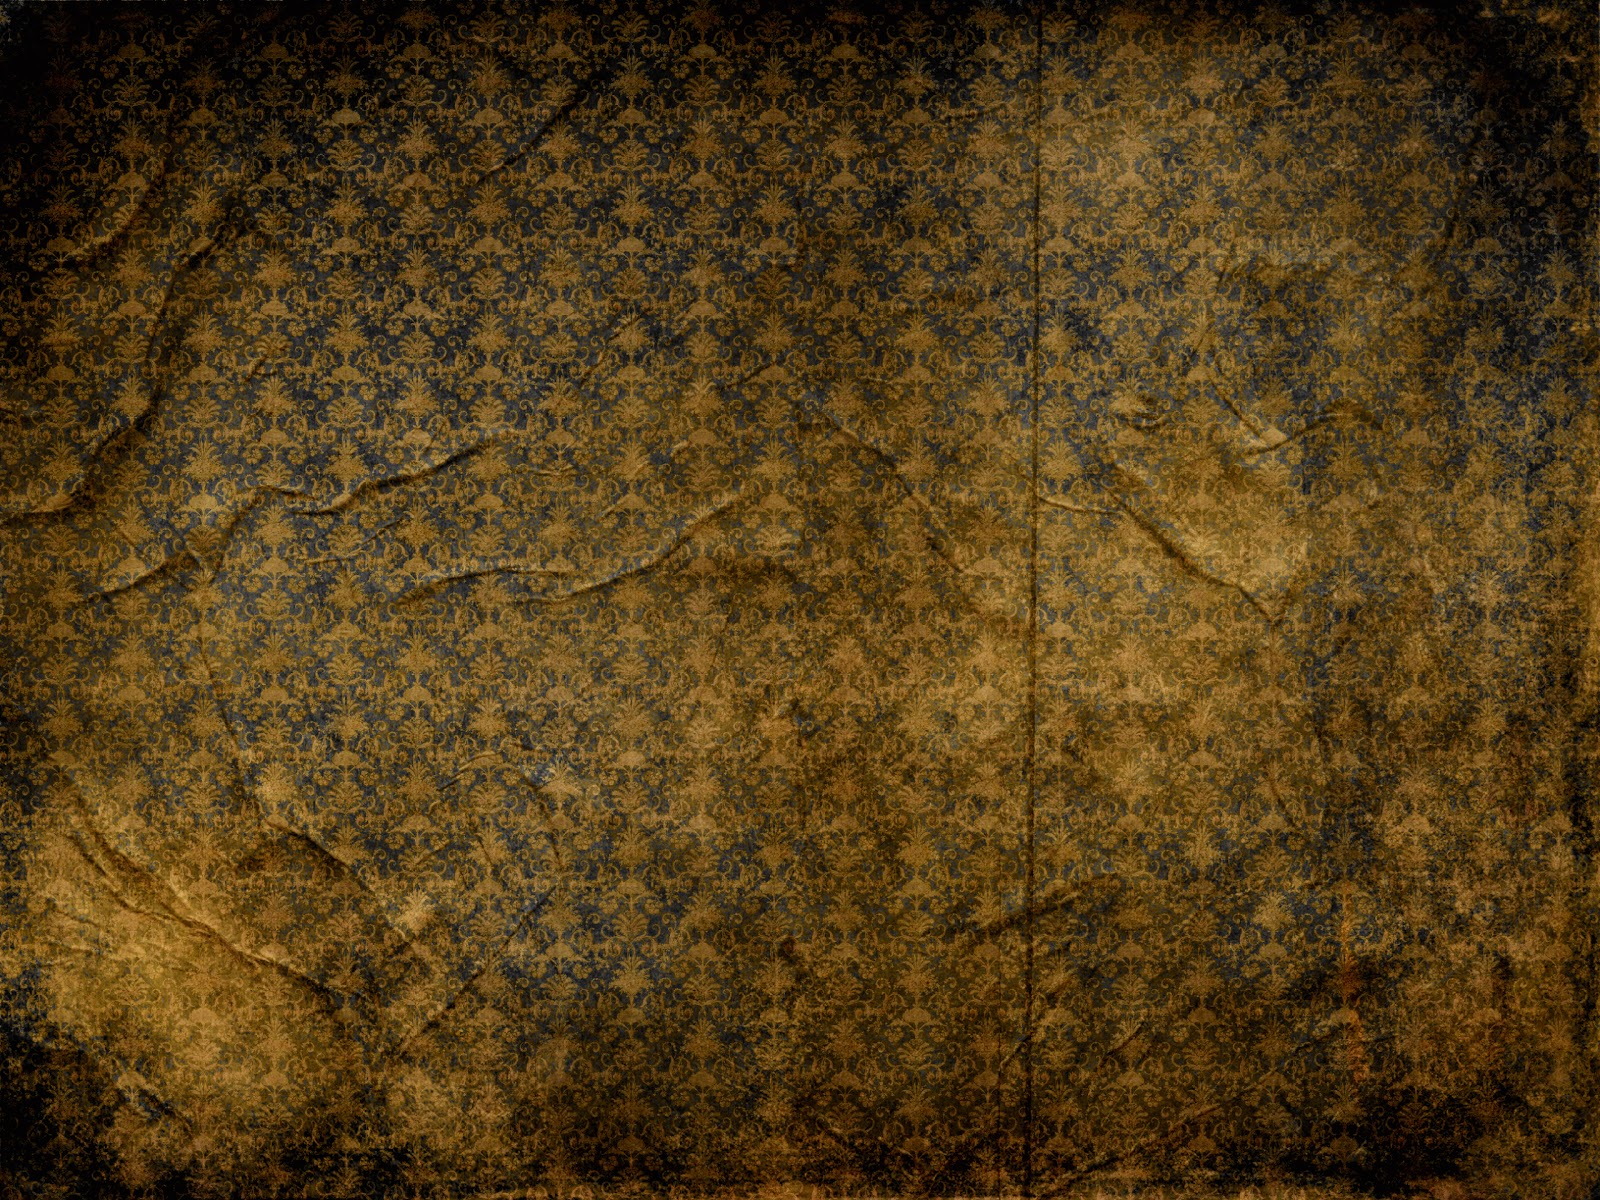 Black and Gold Textured Background